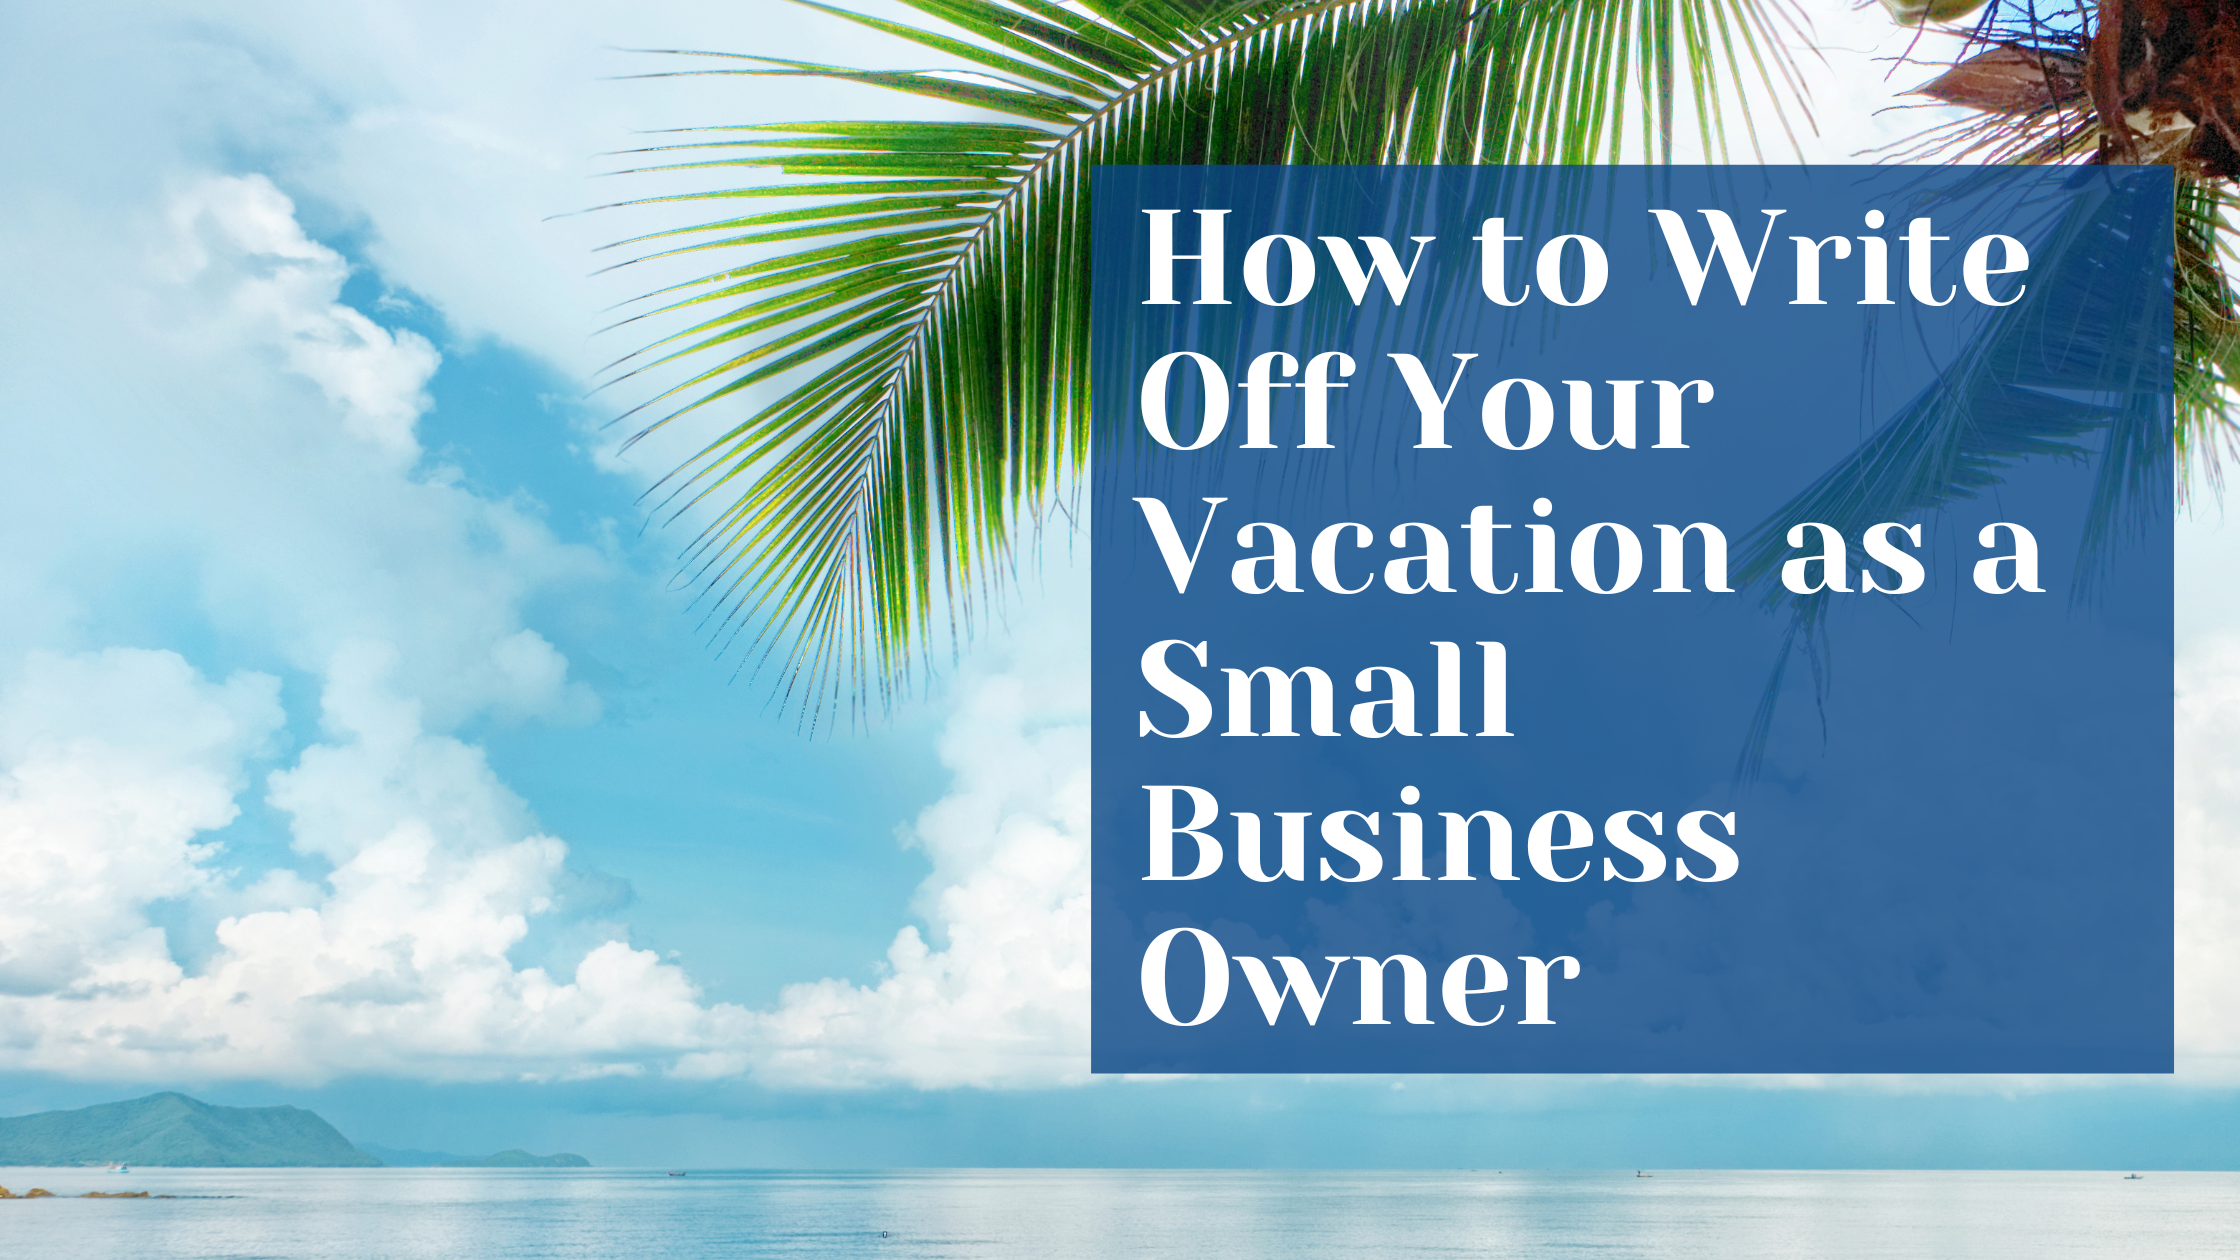 How to Write Off Your Vacation as a Small Business Owner